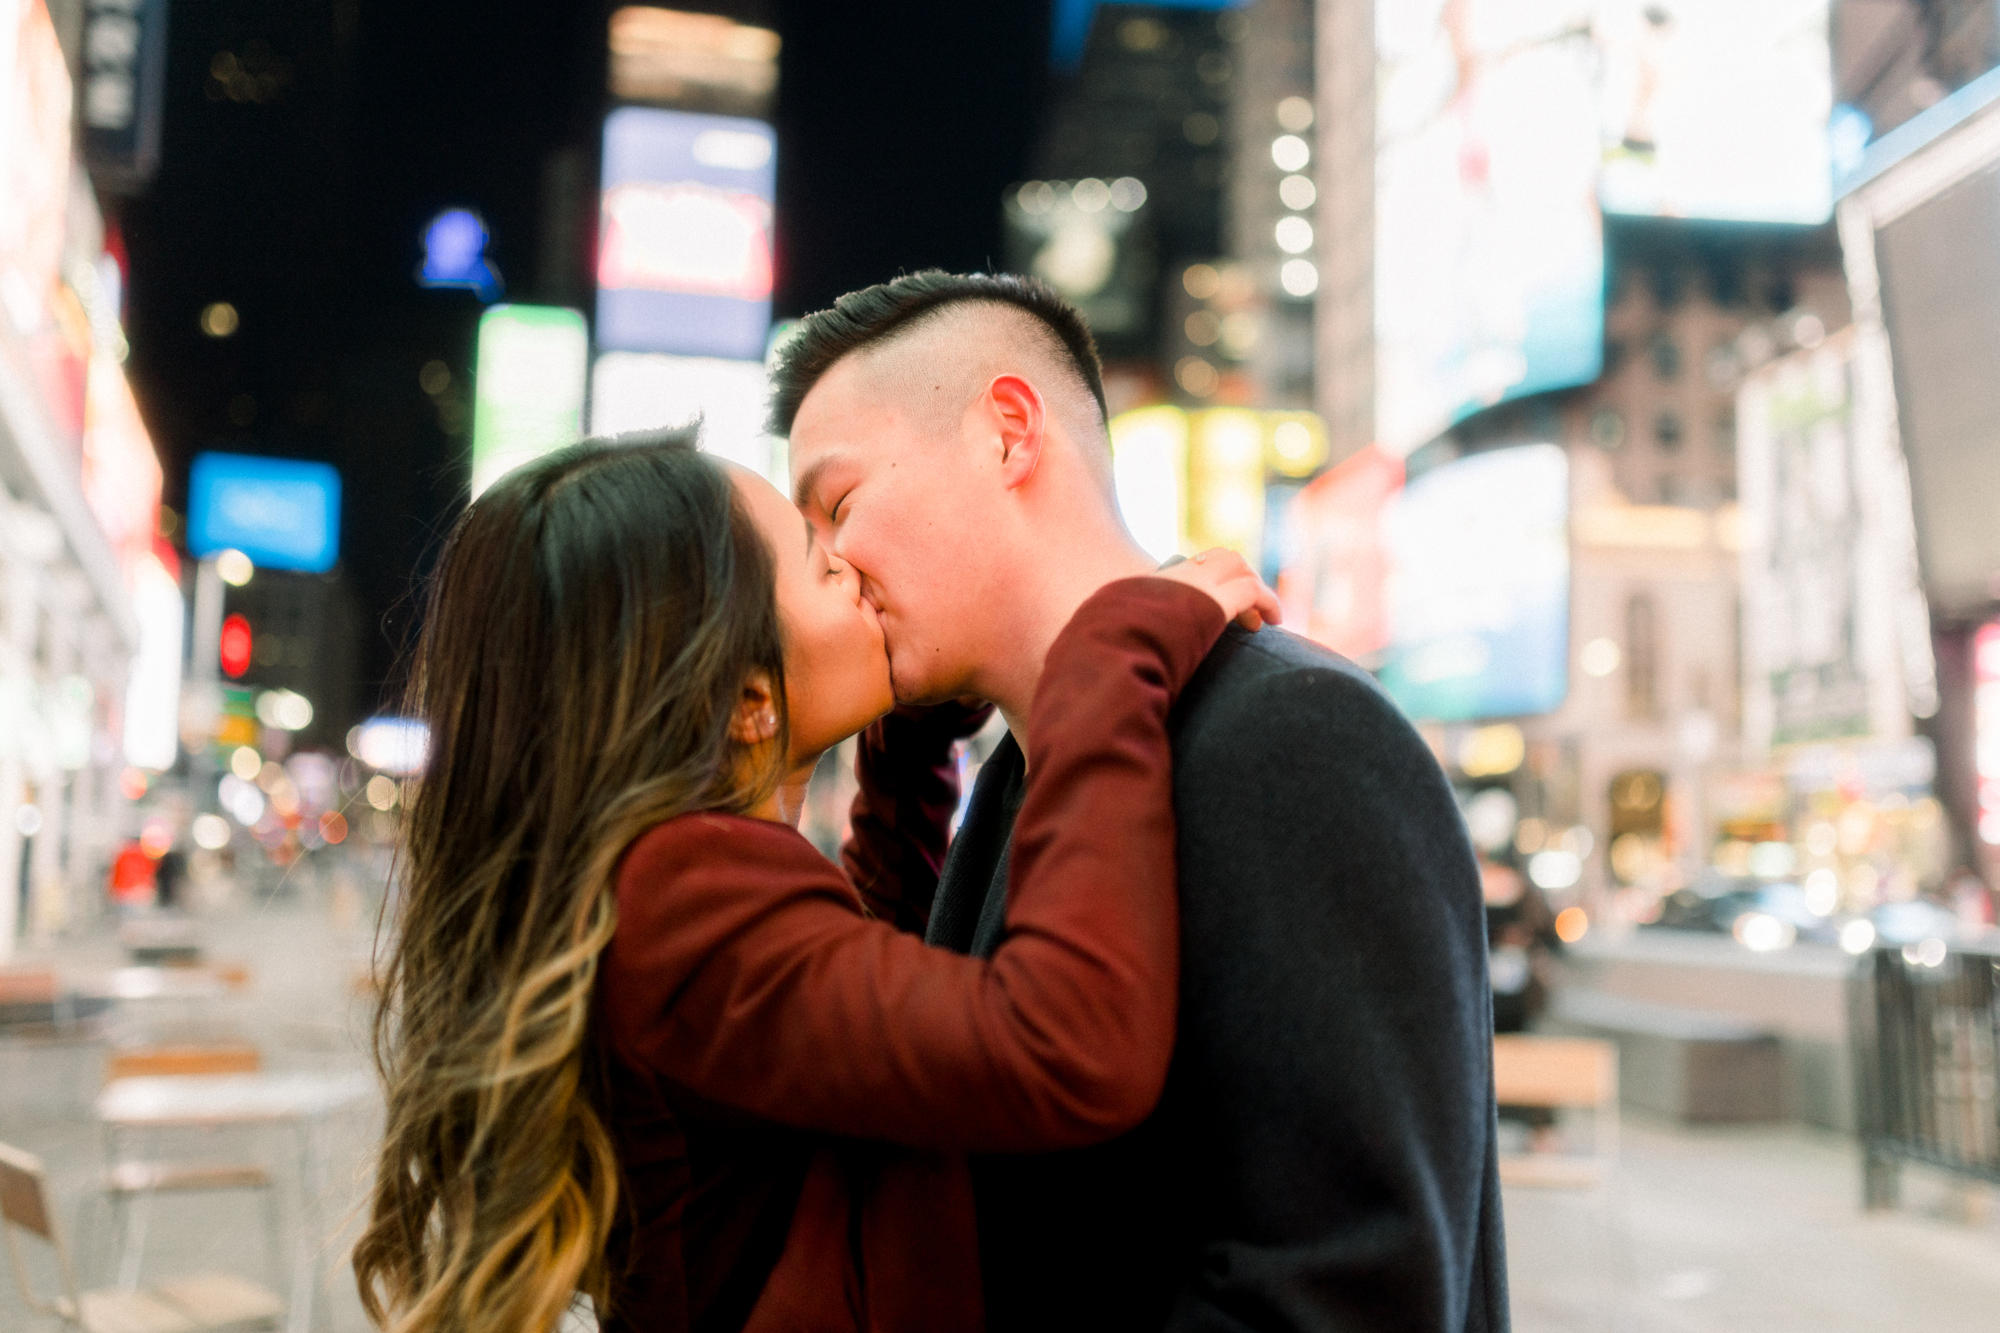 Glowing Nighttime Winter Engagement Photos in New York's Iconic Times Square